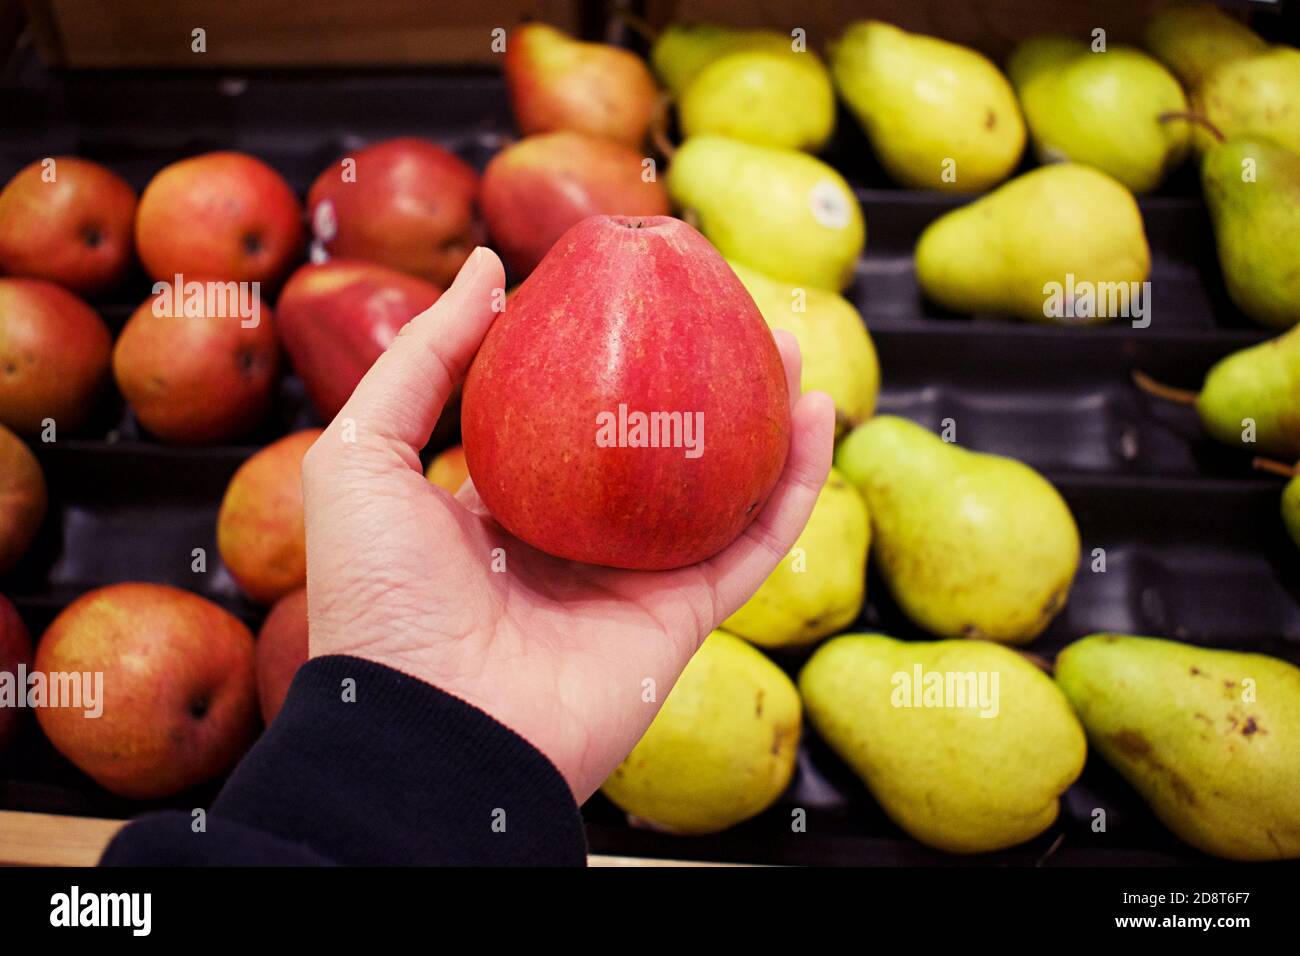 https://c8.alamy.com/comp/2D8T6F7/red-pear-held-in-hand-with-rows-of-fruit-on-display-as-a-blurry-background-2D8T6F7.jpg